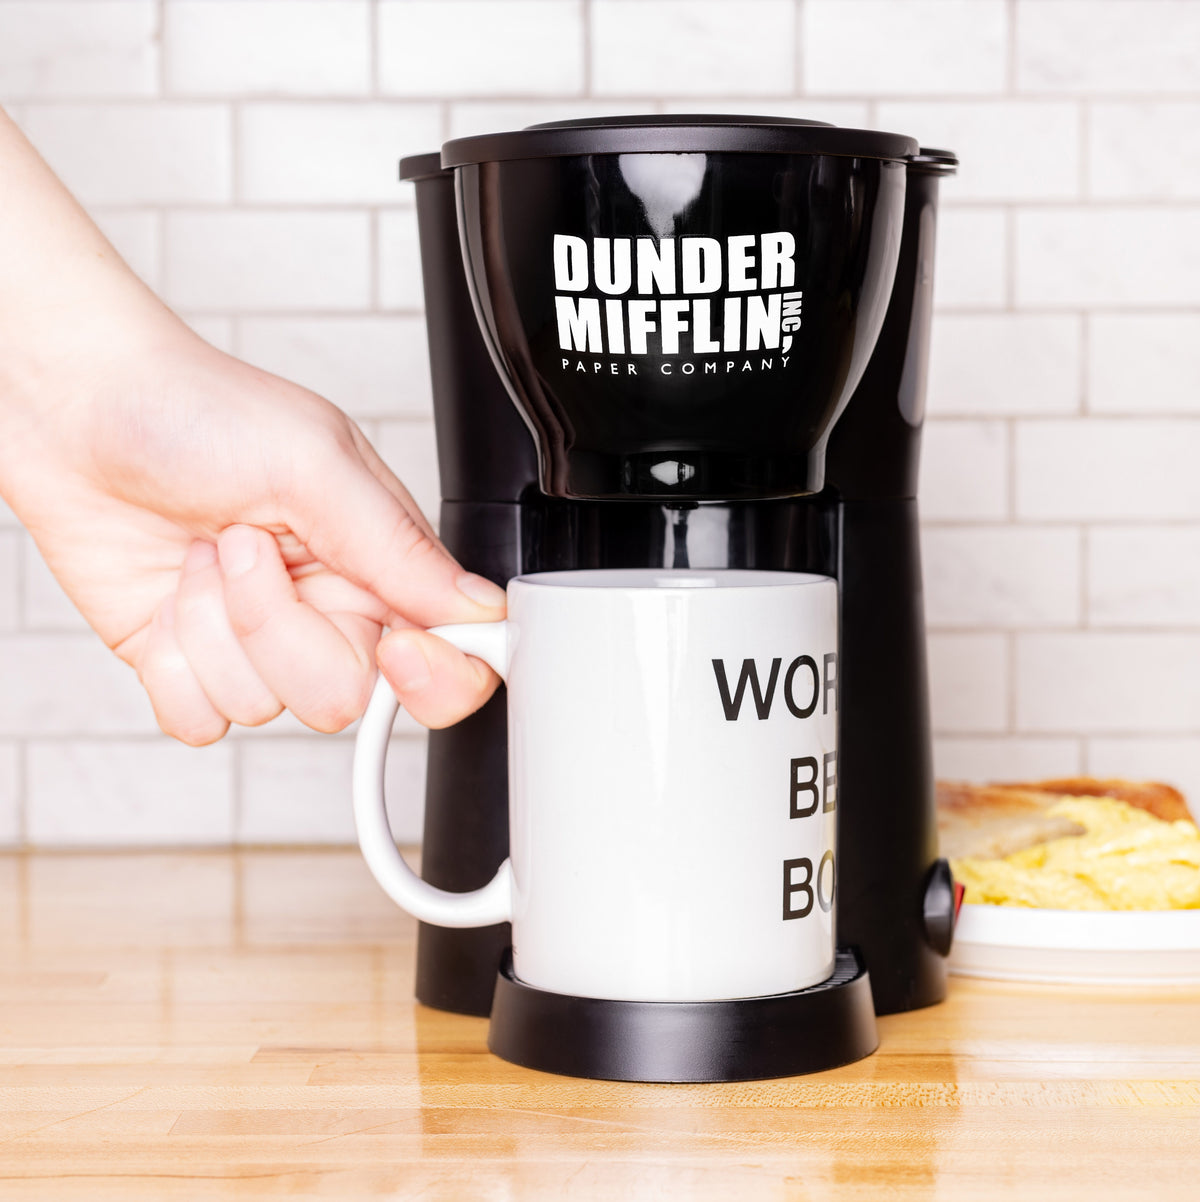 The Office Coffee Maker Set